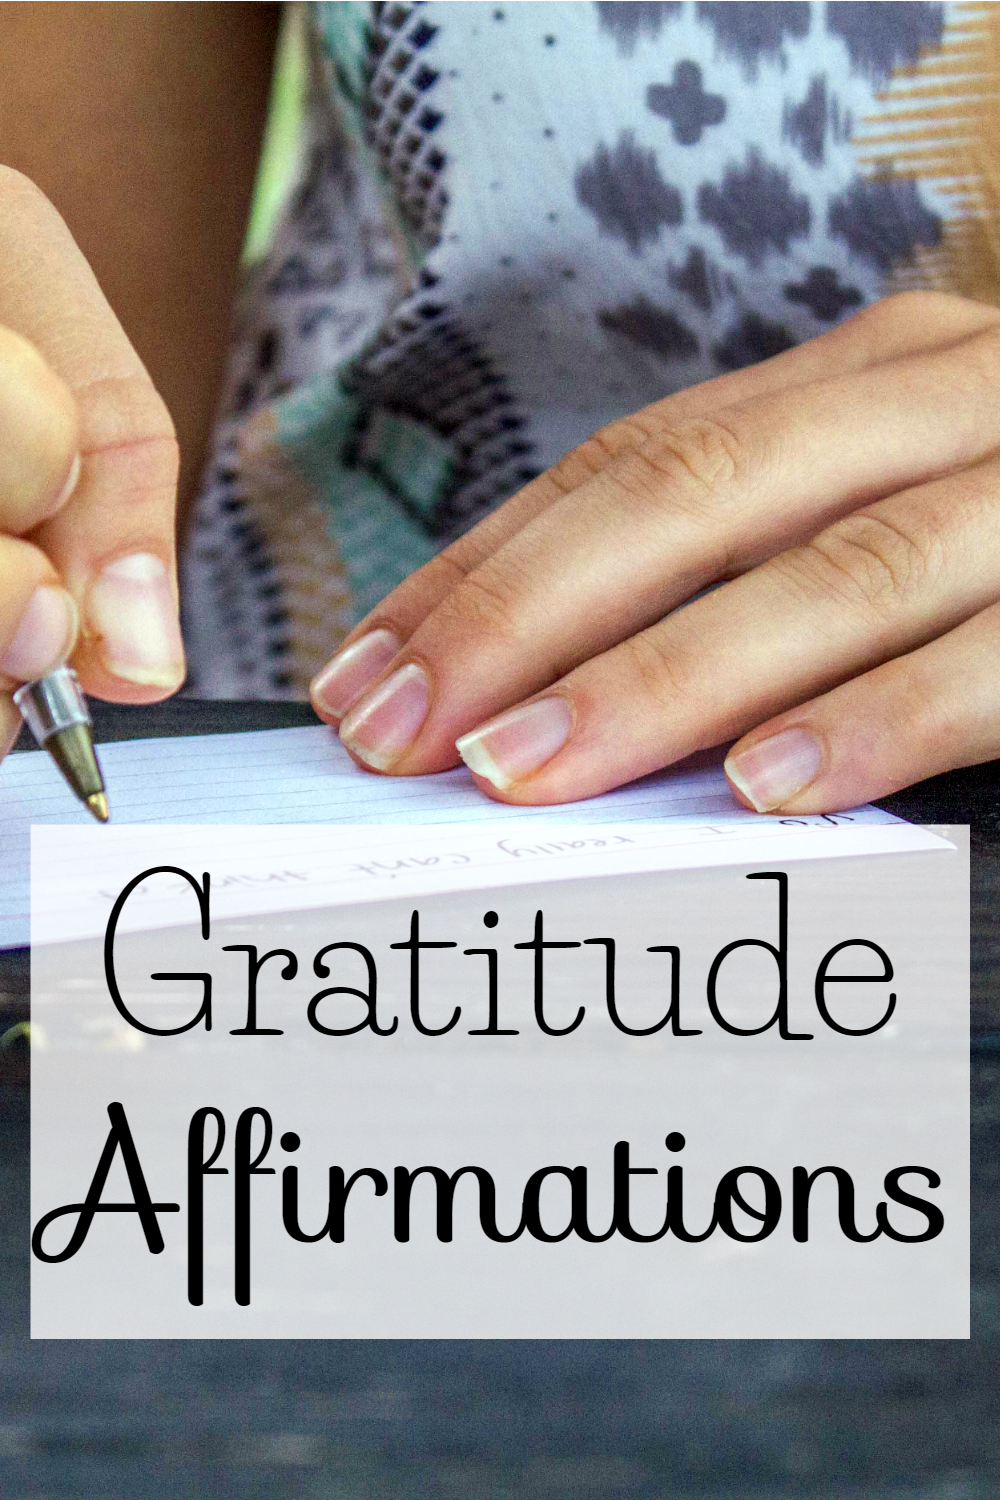 Daily Gratitude Affirmations at The Littlest Way